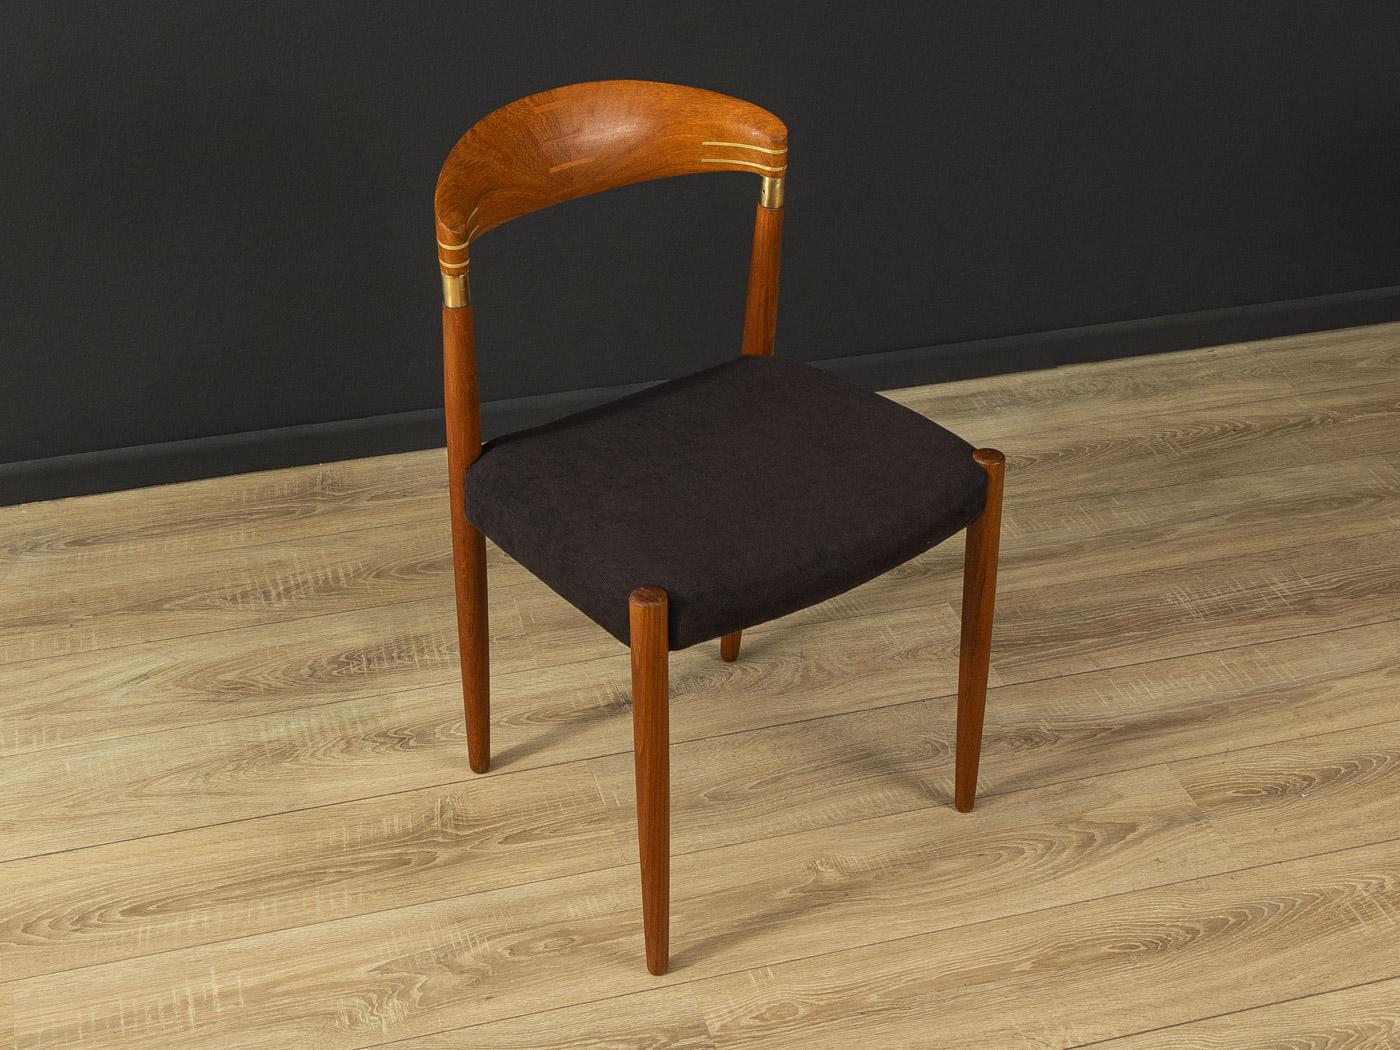 Rare Dining Chair by Knud Andersen for J.C.A. Jensen. High-quality teak frame with brass detailing. The chair has been re-upholstered and covered with a high-quality fabric in black. Made in Denmark (Branding on the frame).